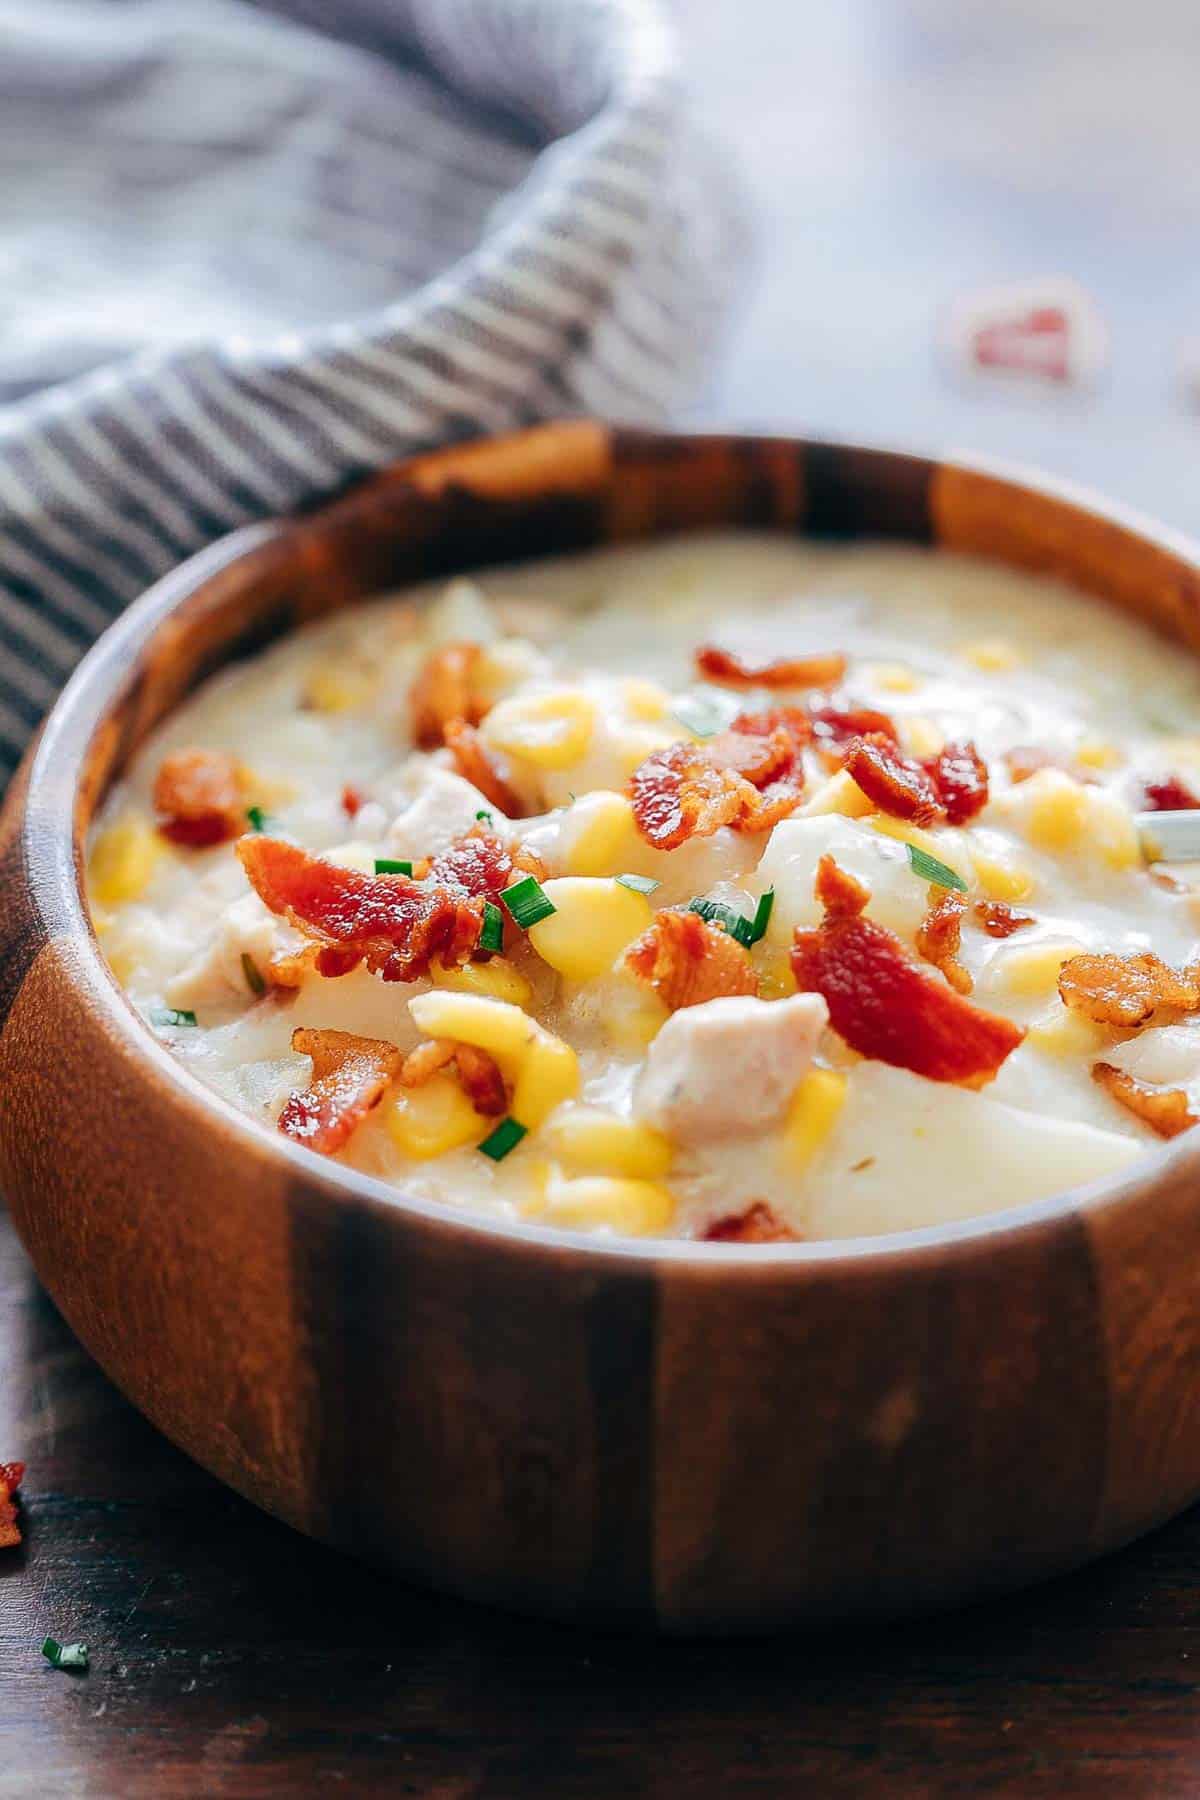 Instant Pot Chicken Potato Corn Chowder with Bacon served in a wooden bowl.